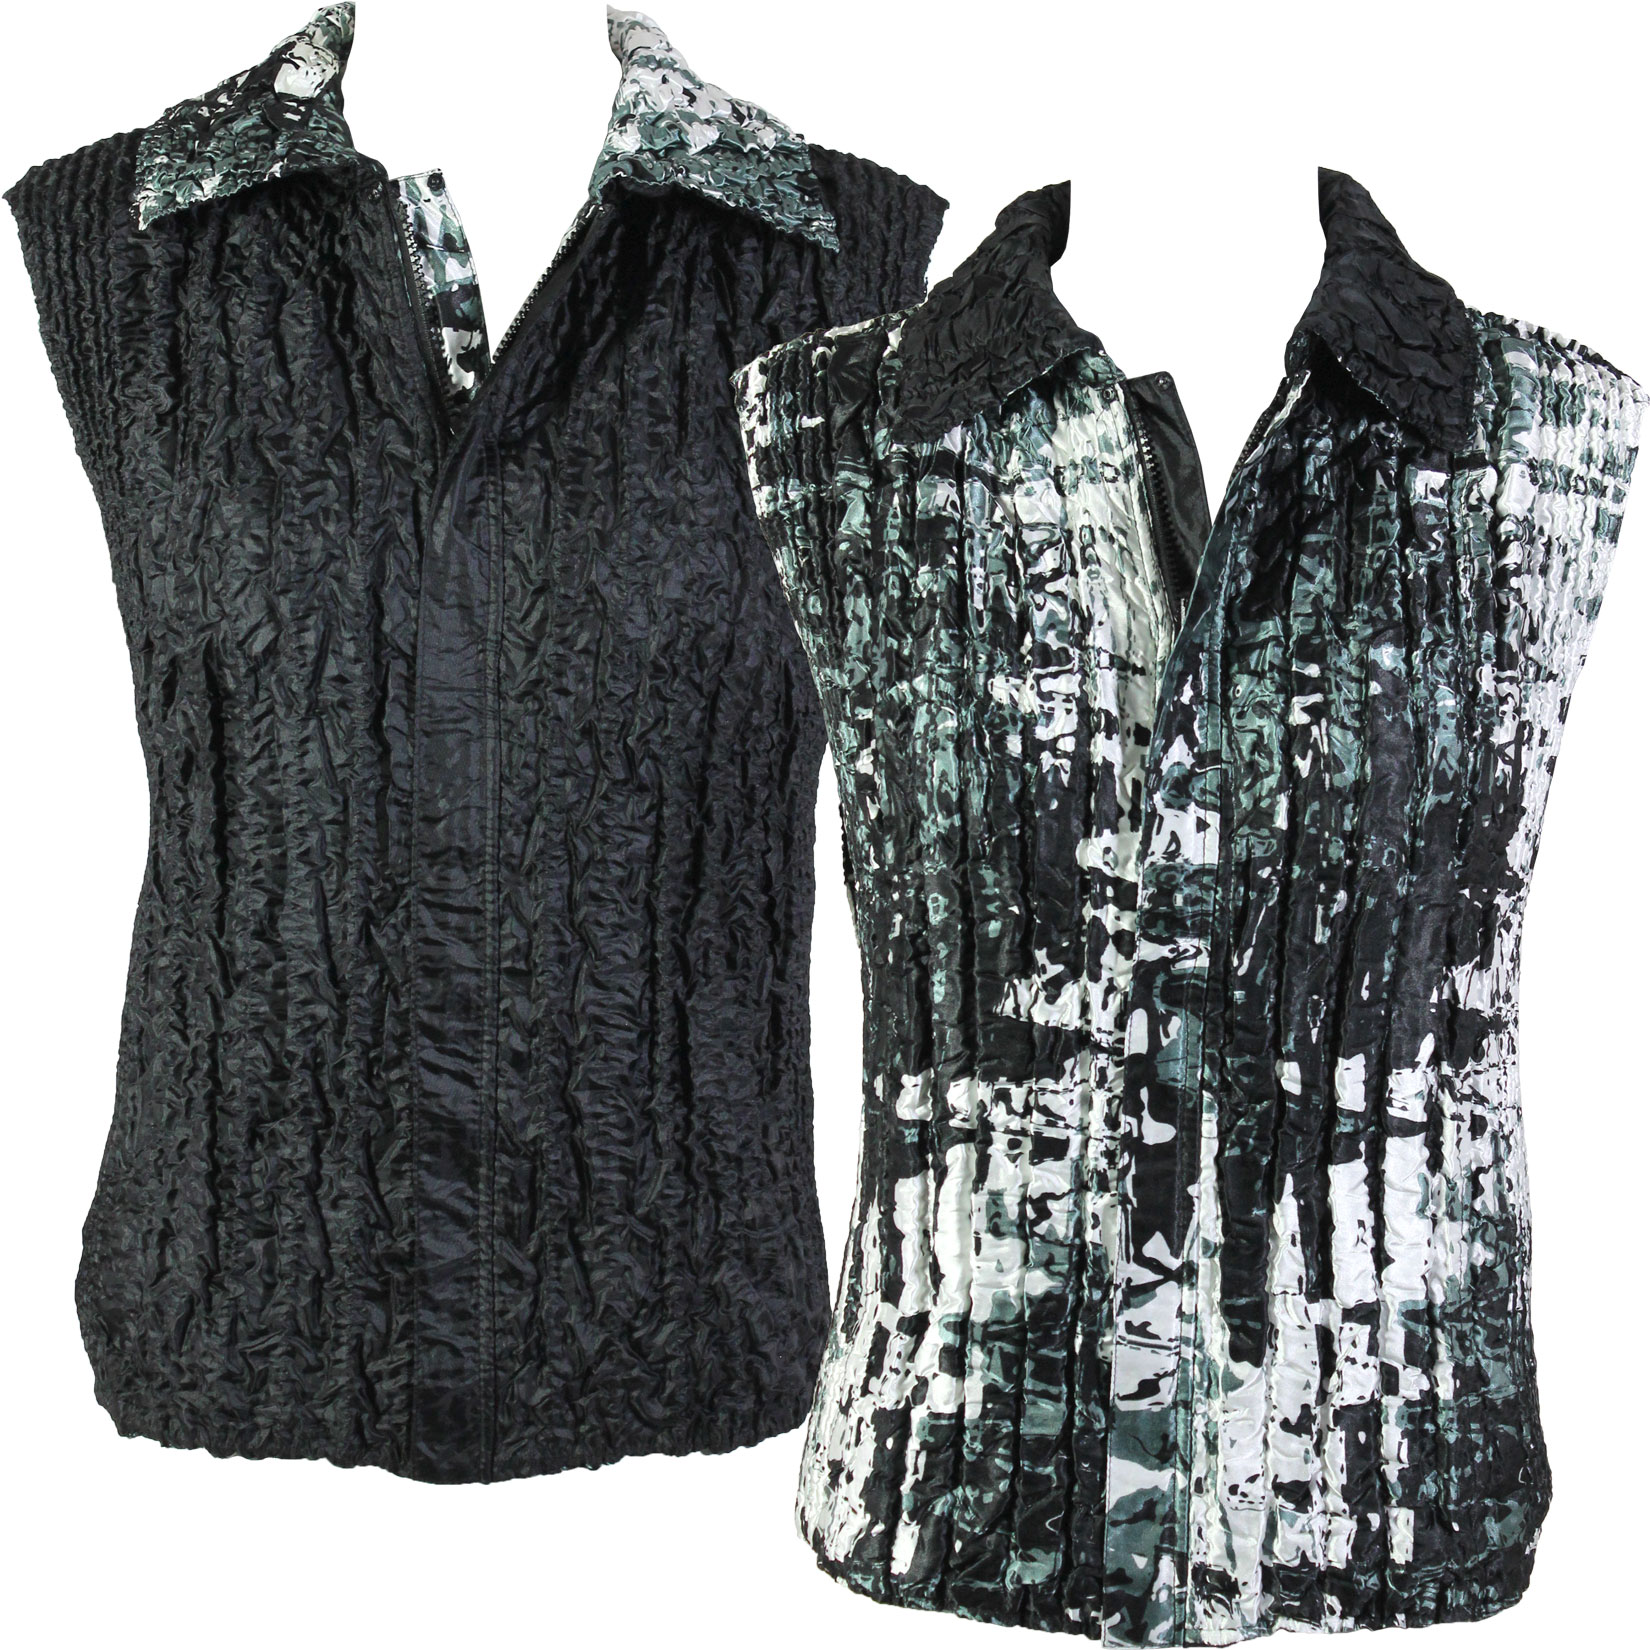 4537 - Quilted Reversible Vests 